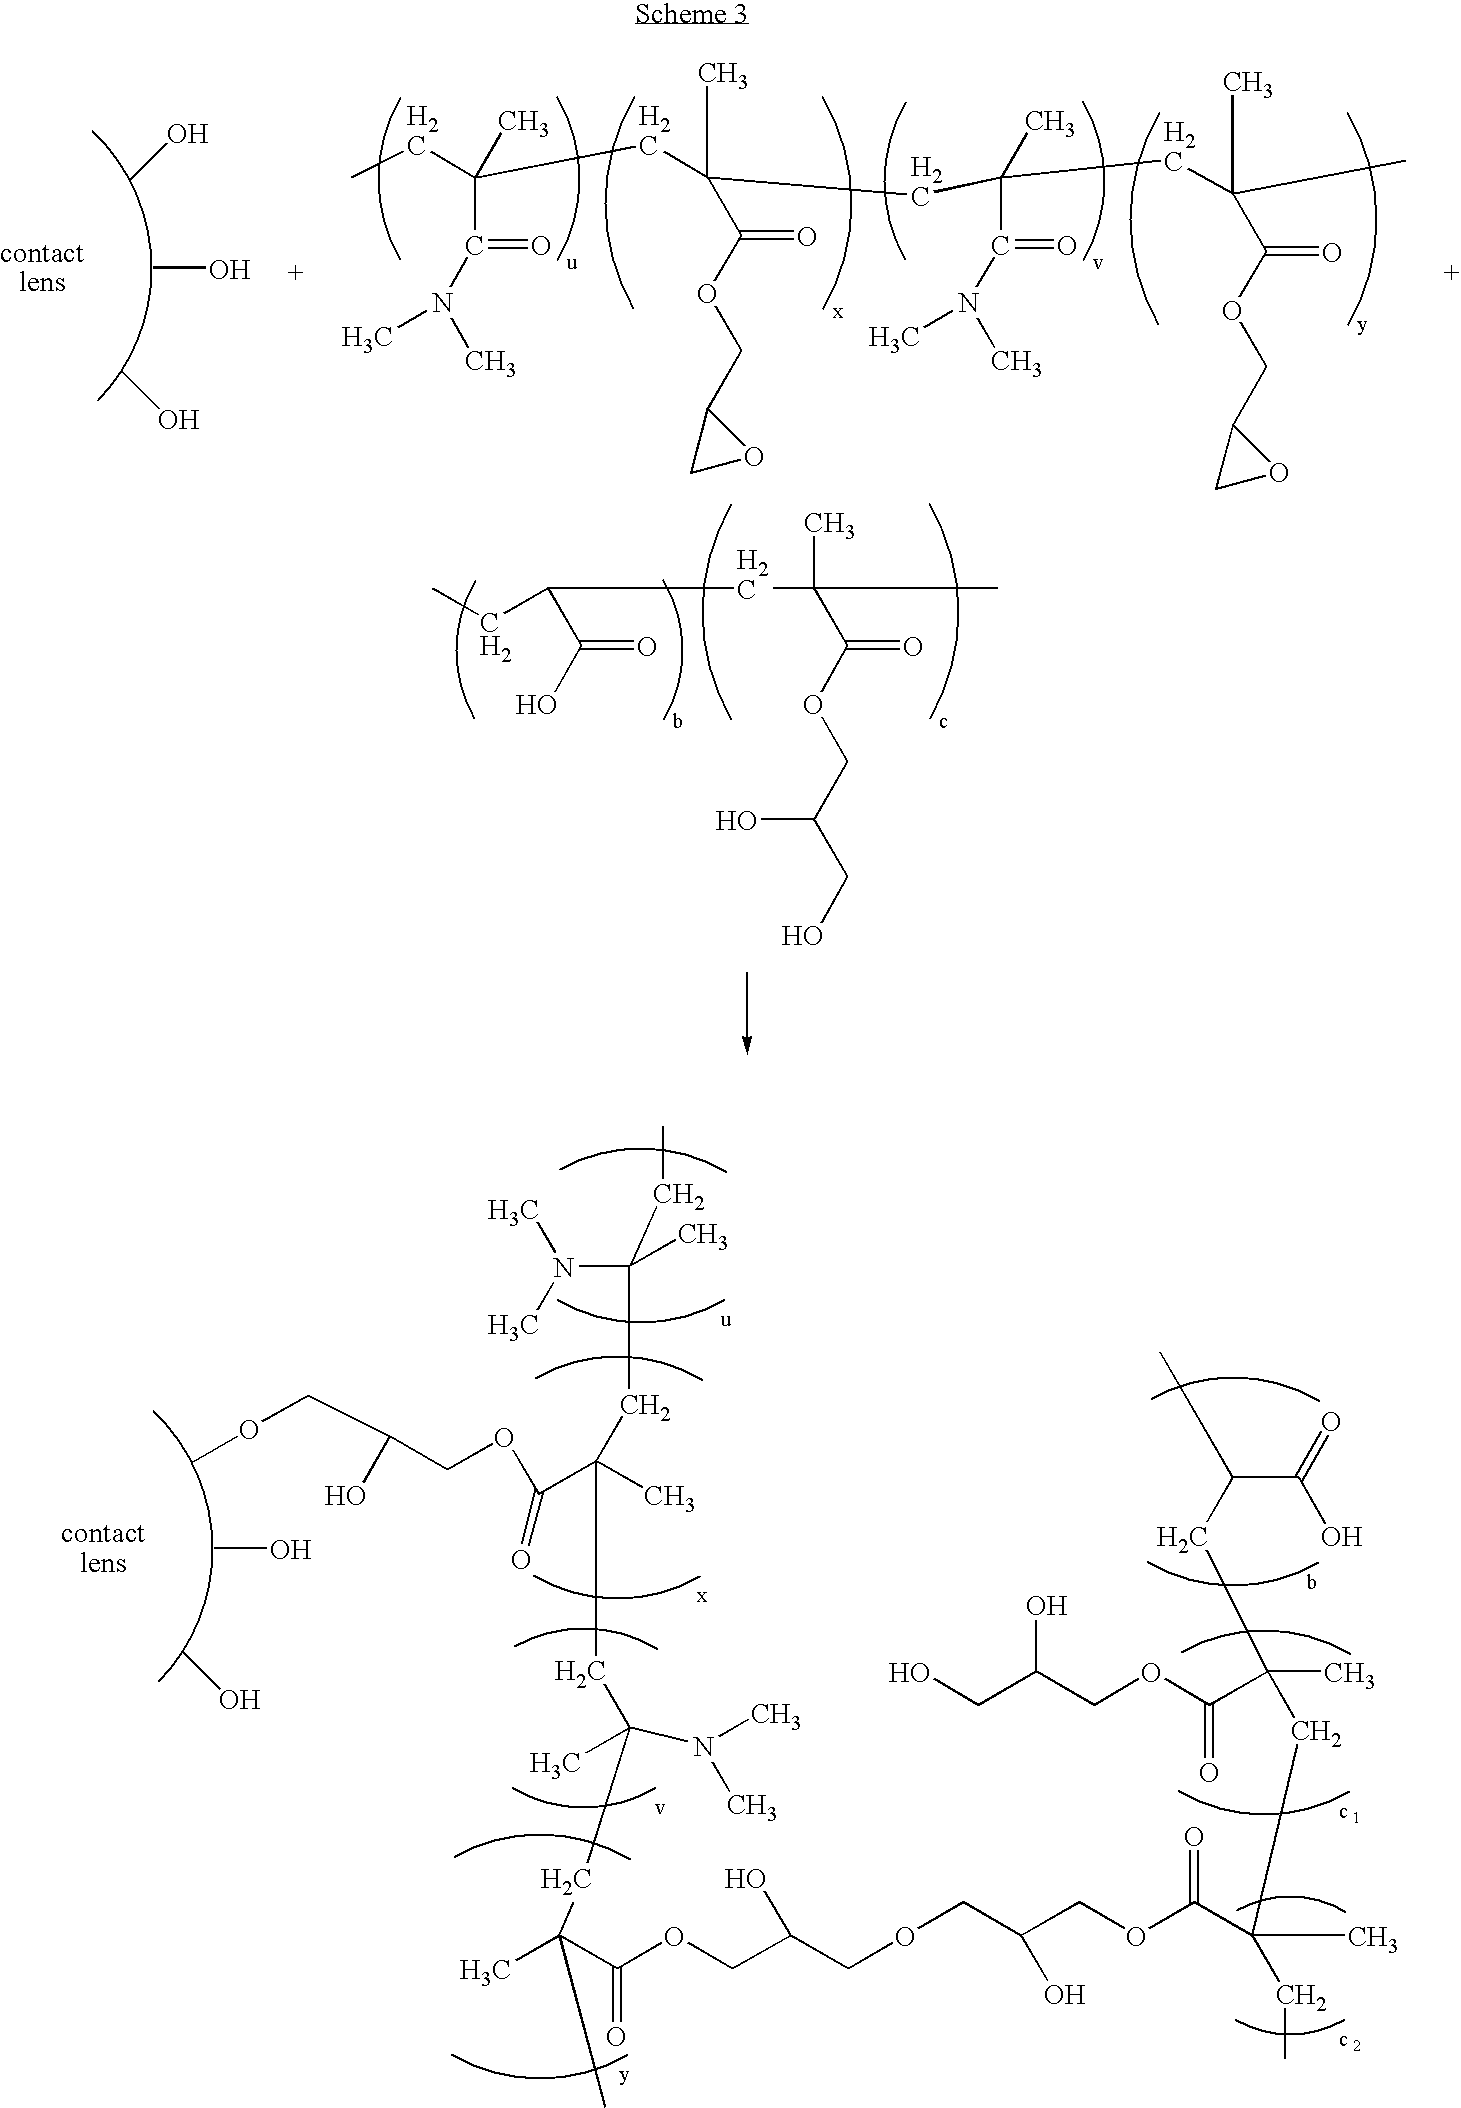 Polymers comprising polyhydric alcohols, medical devices modified with same, and method of making